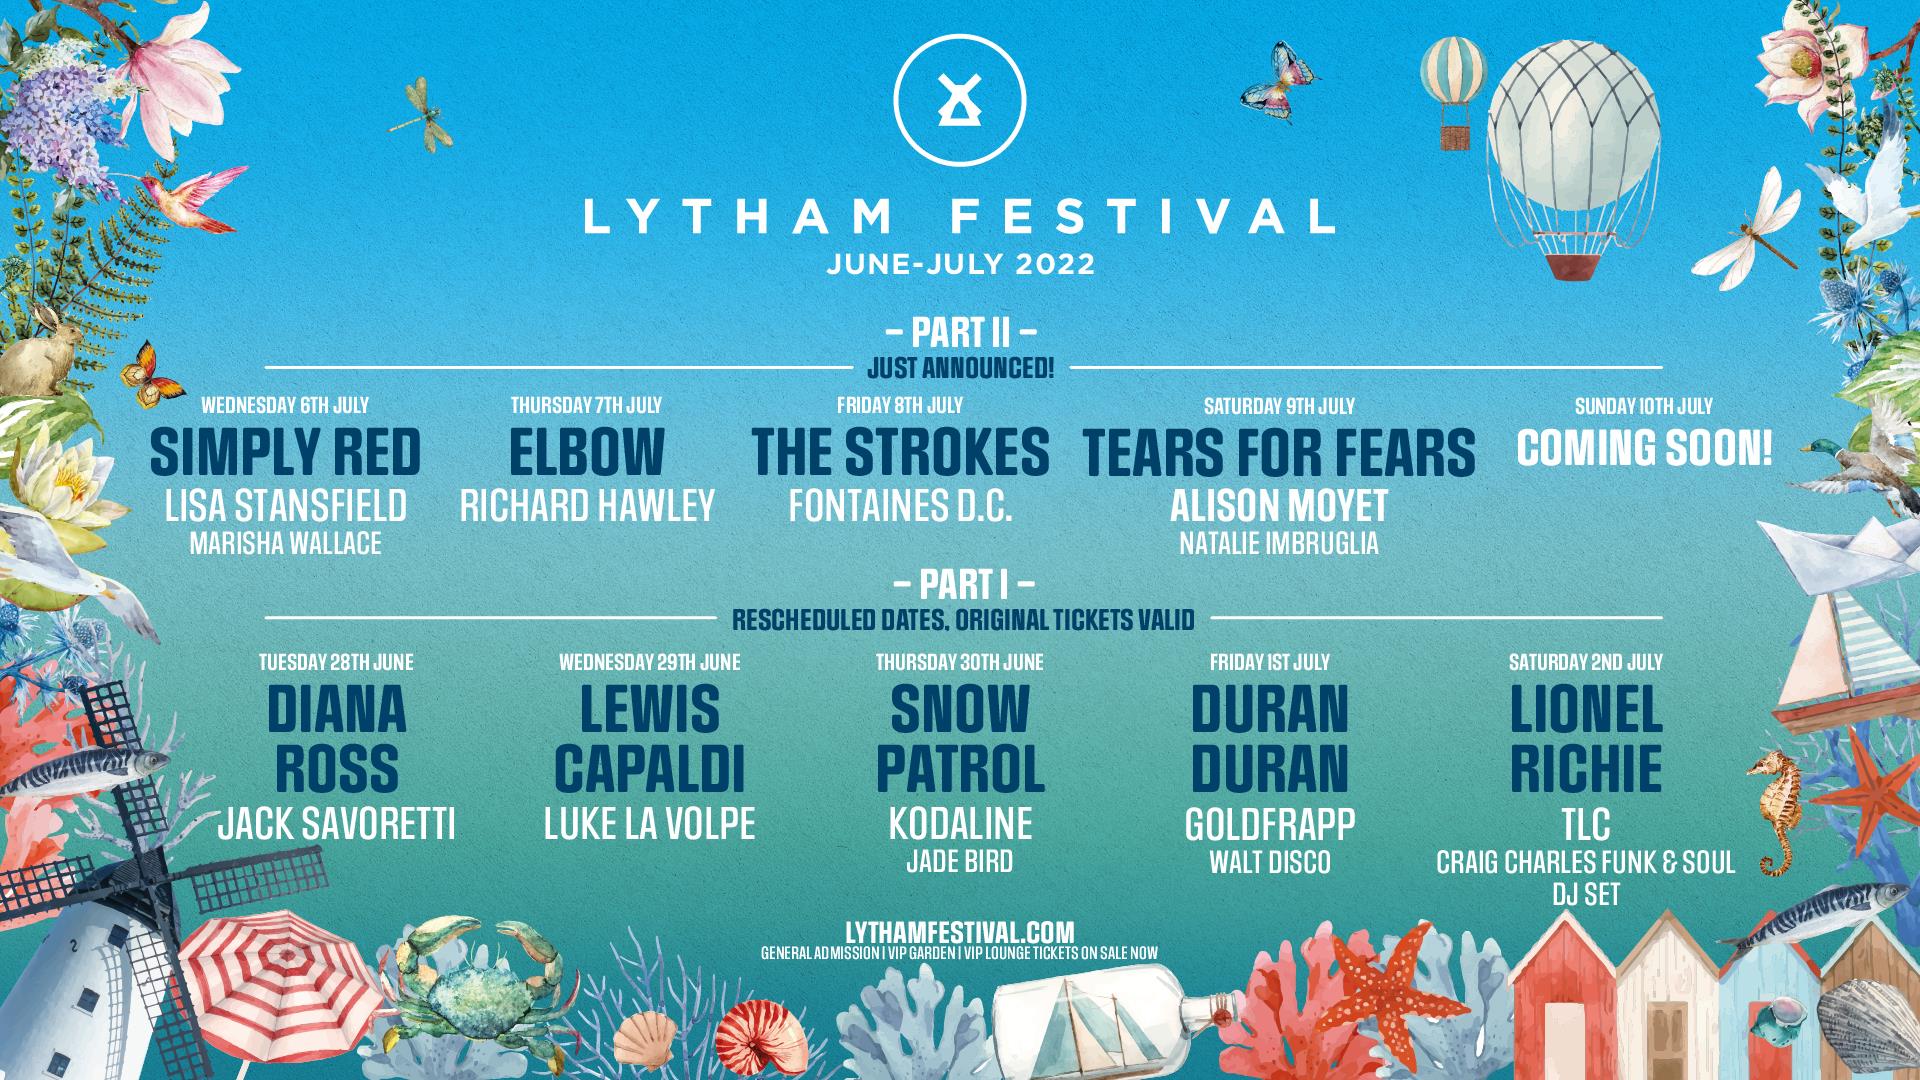 Lytham Festival 2022 – The Strokes - Lowther Pavilion